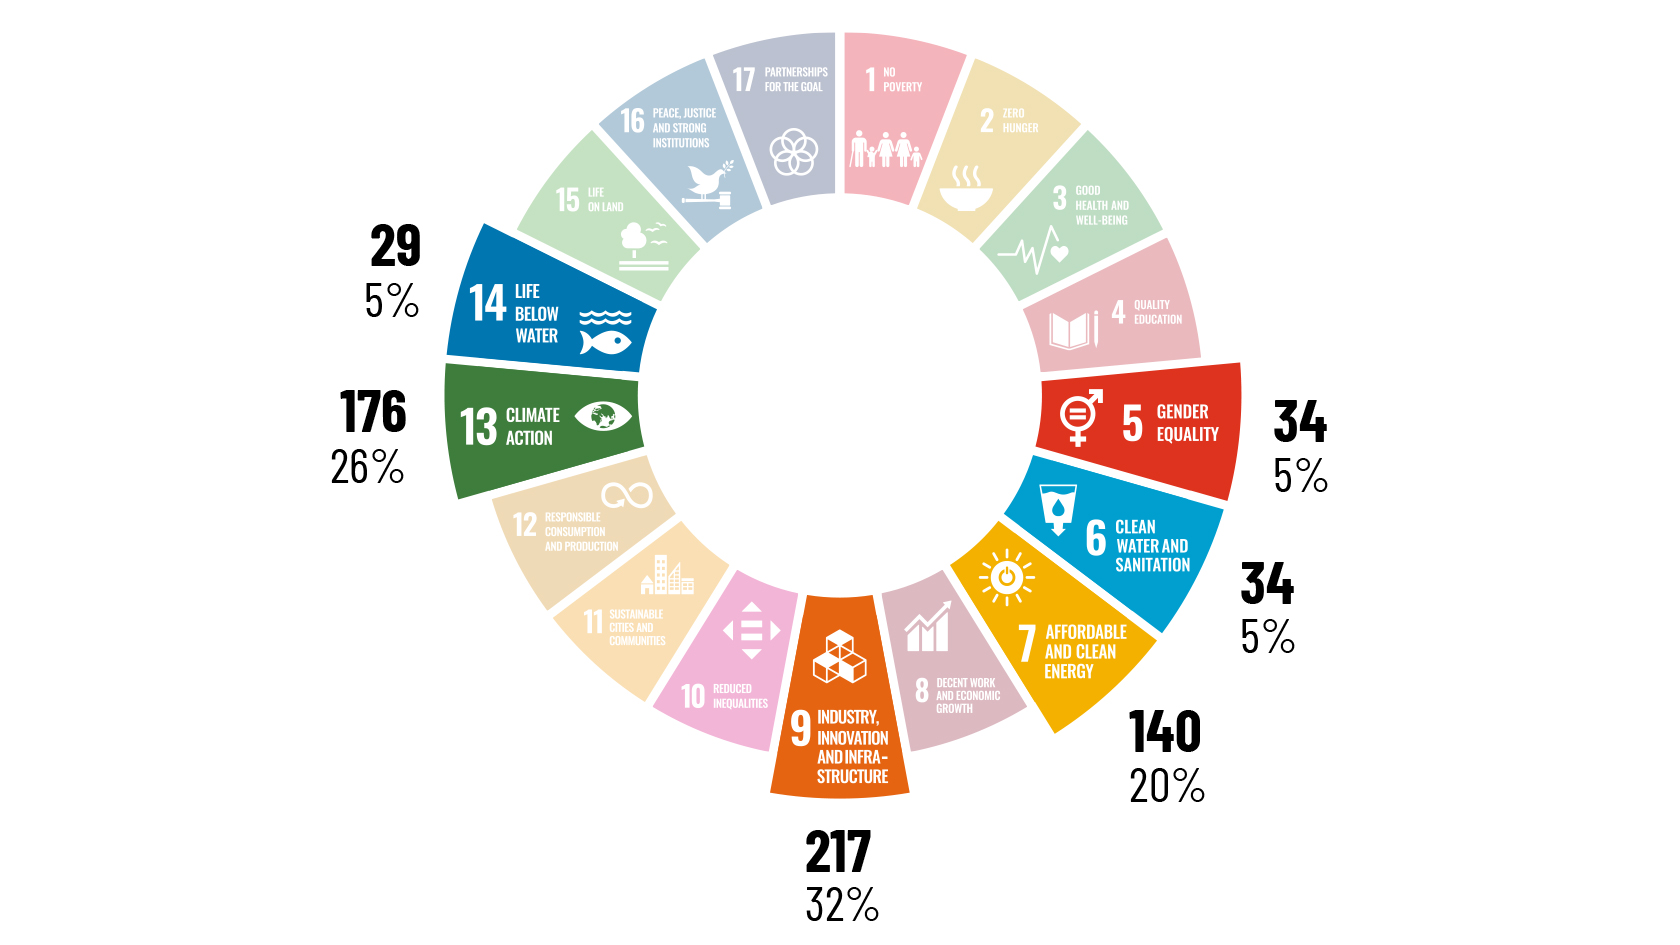 Number of projects in the active portfolio by the end of 2023 with major contribution to UN Sustainable Development Goals.